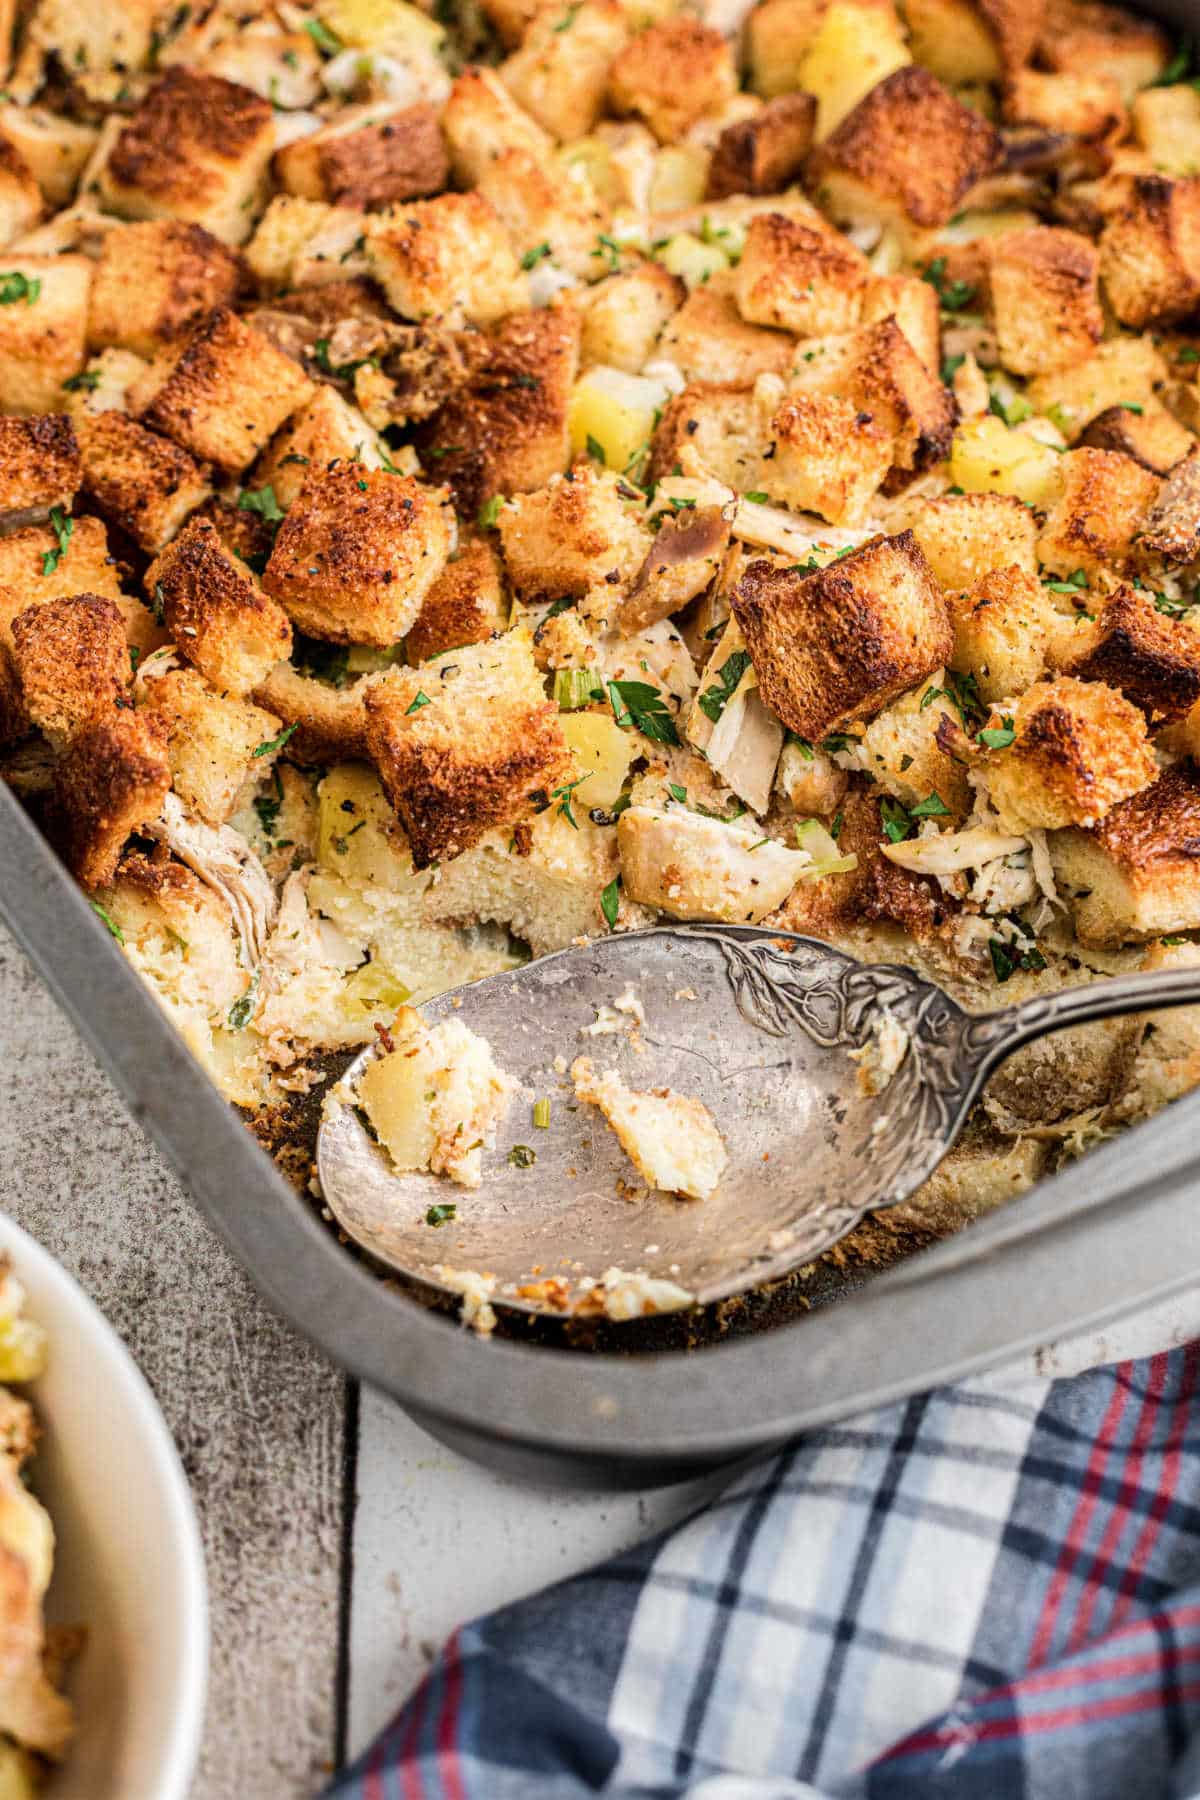 The corner of a pan full of Amish turkey stuffing with a spoon resting.